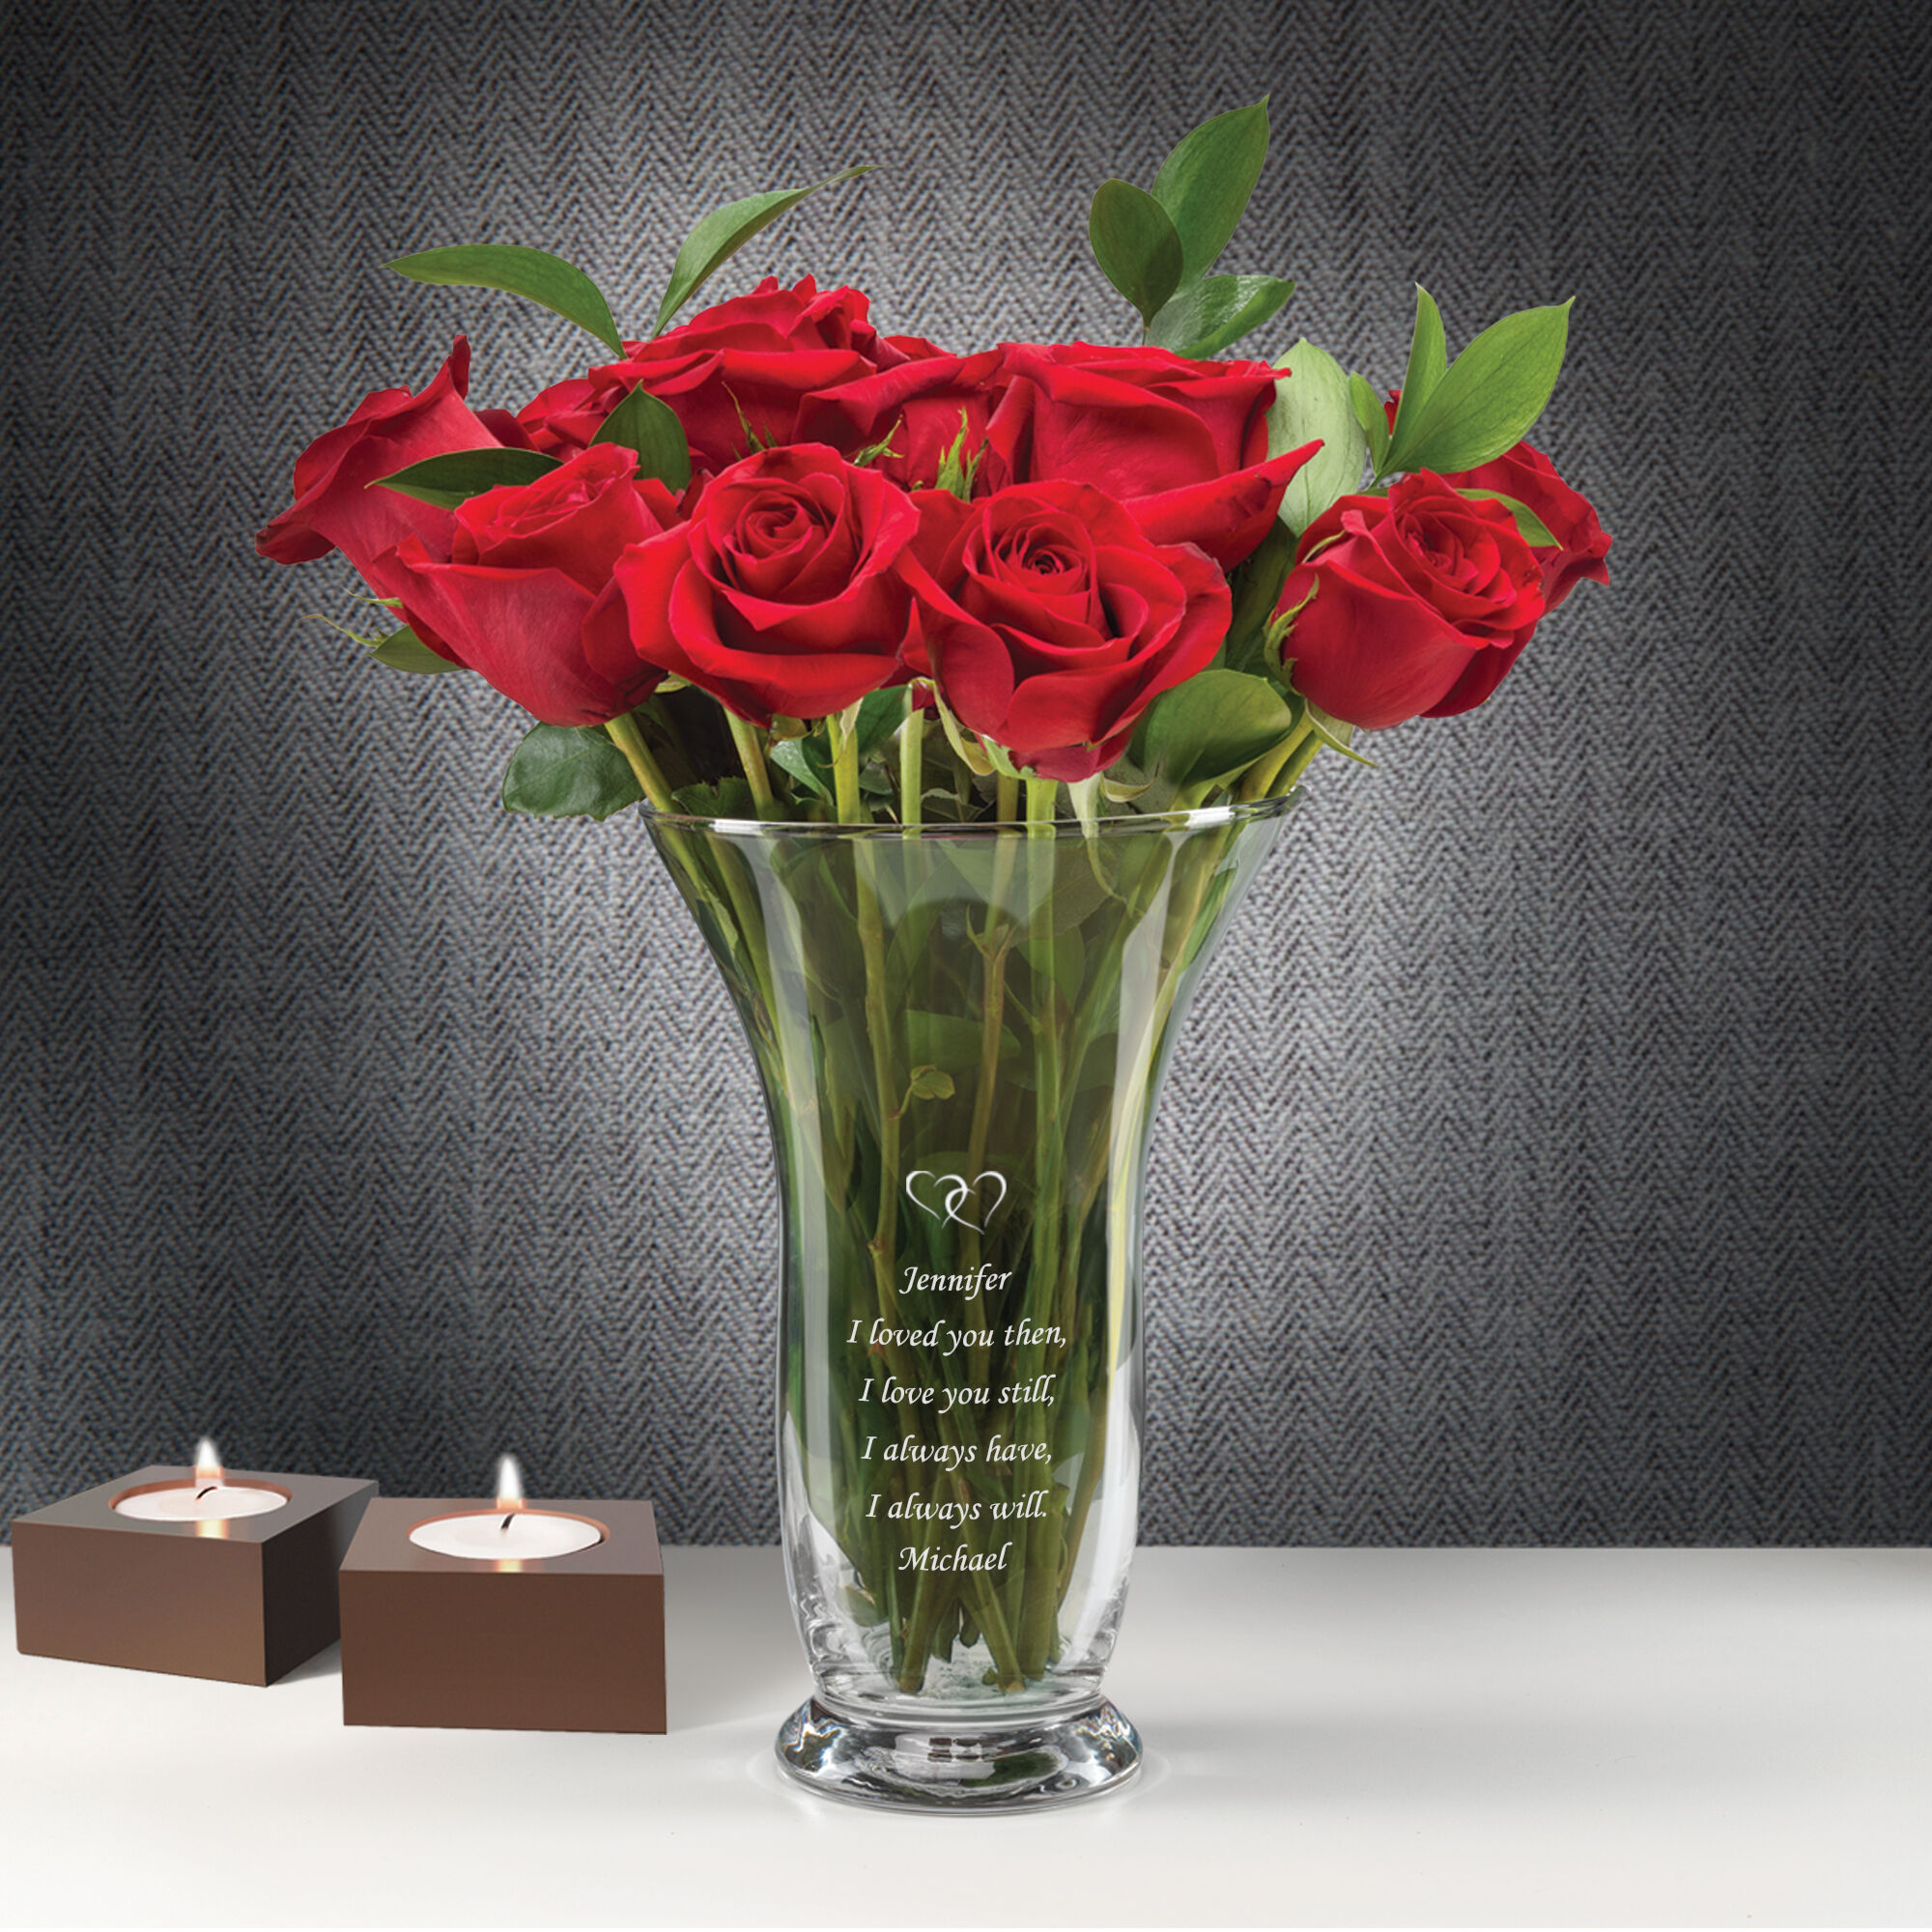 The Personalized I Love You Vase 10157 0026 m room